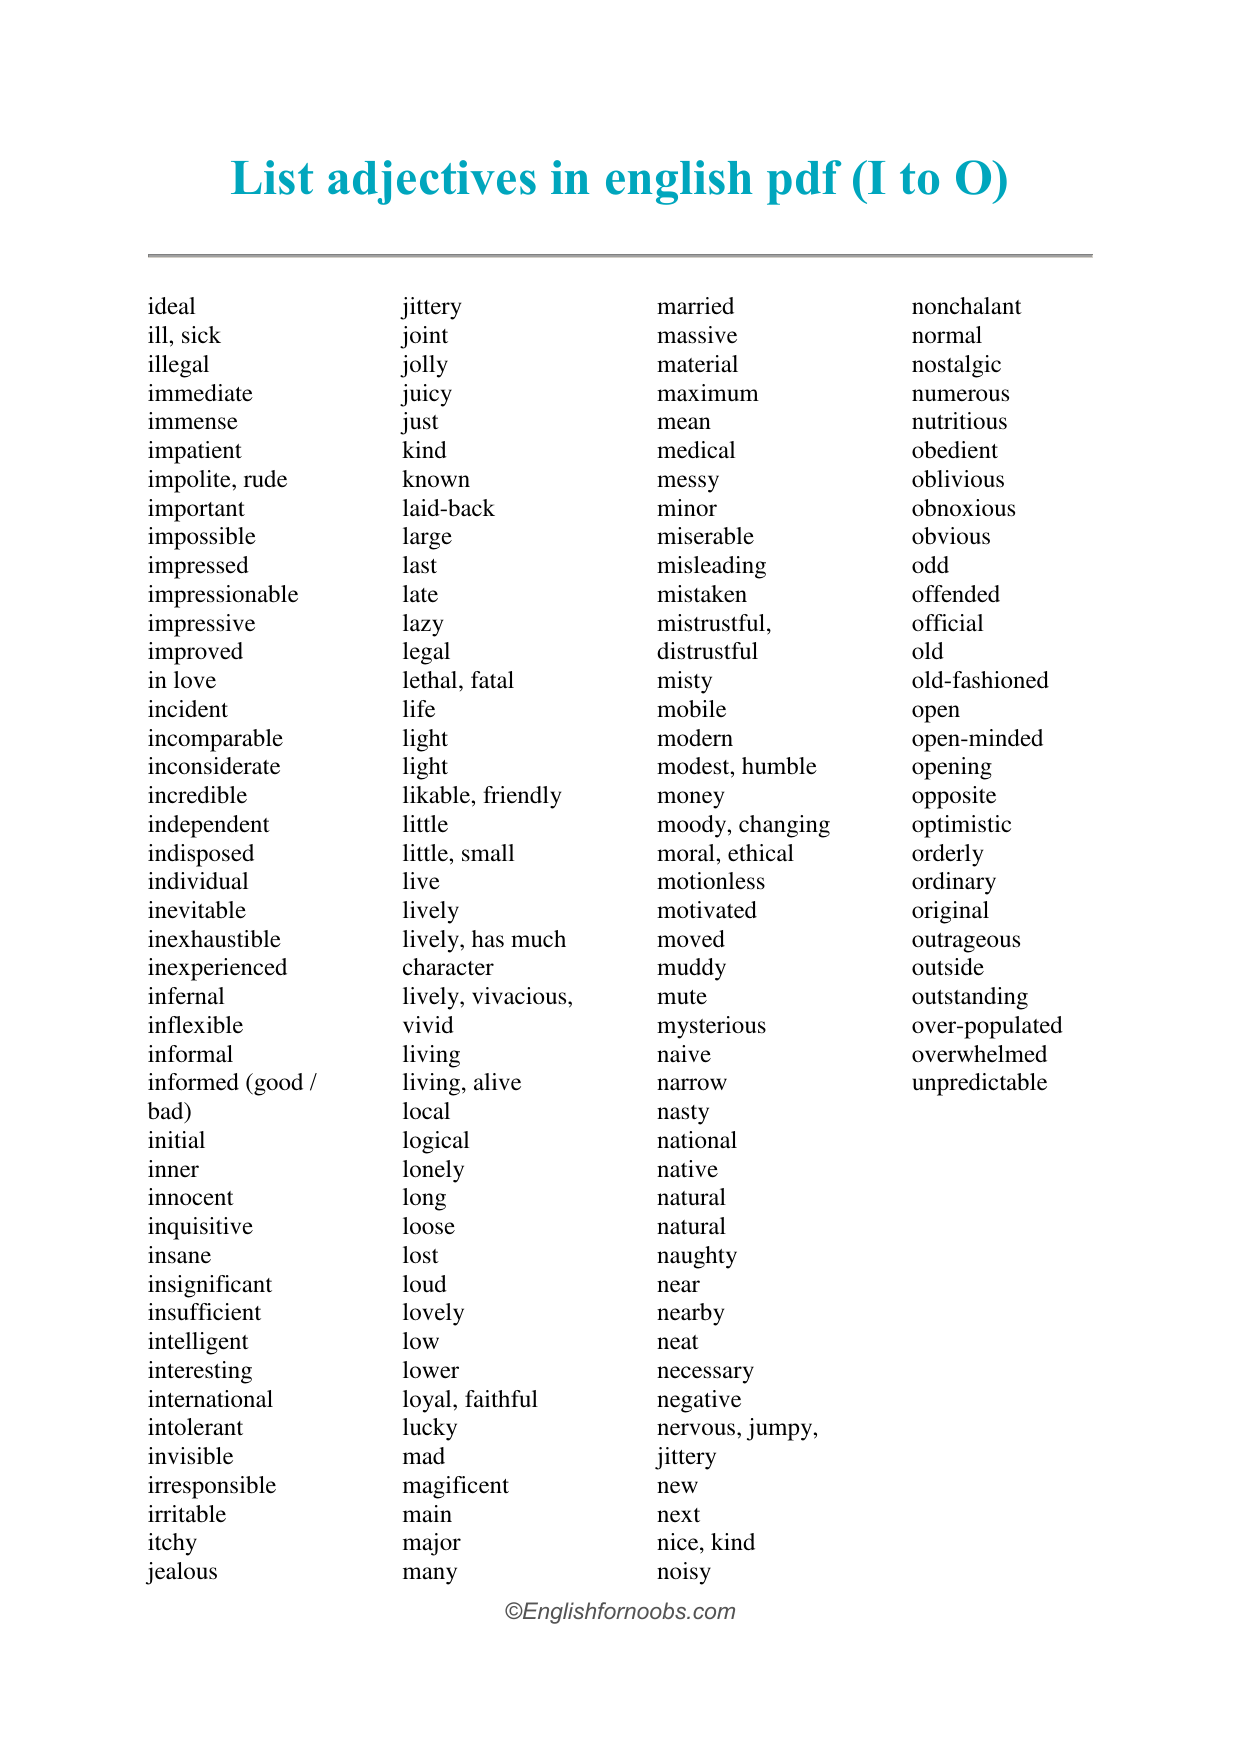 List adjectives in english pdf I to O